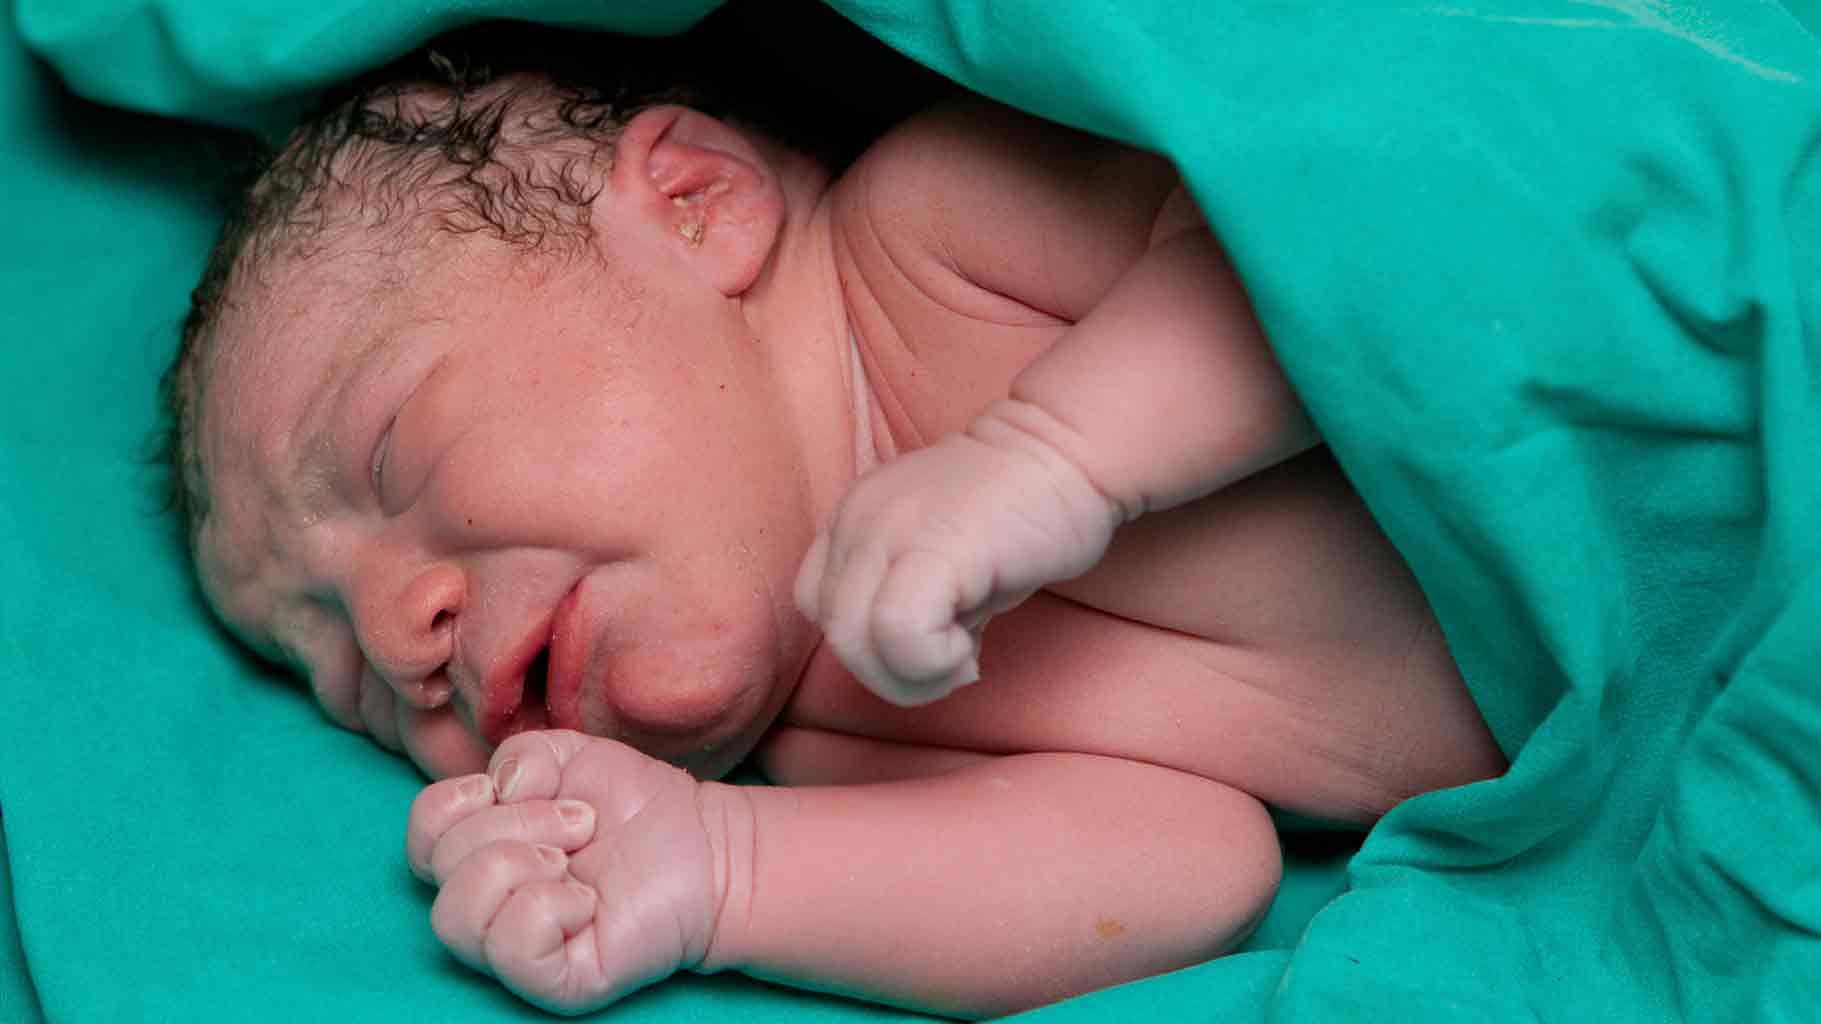 The idea behind this unusual practice is that C-section babies miss out on good bacteria they would have otherwise been exposed to in the birth canal, had they been born vaginally (Photo: iStock)